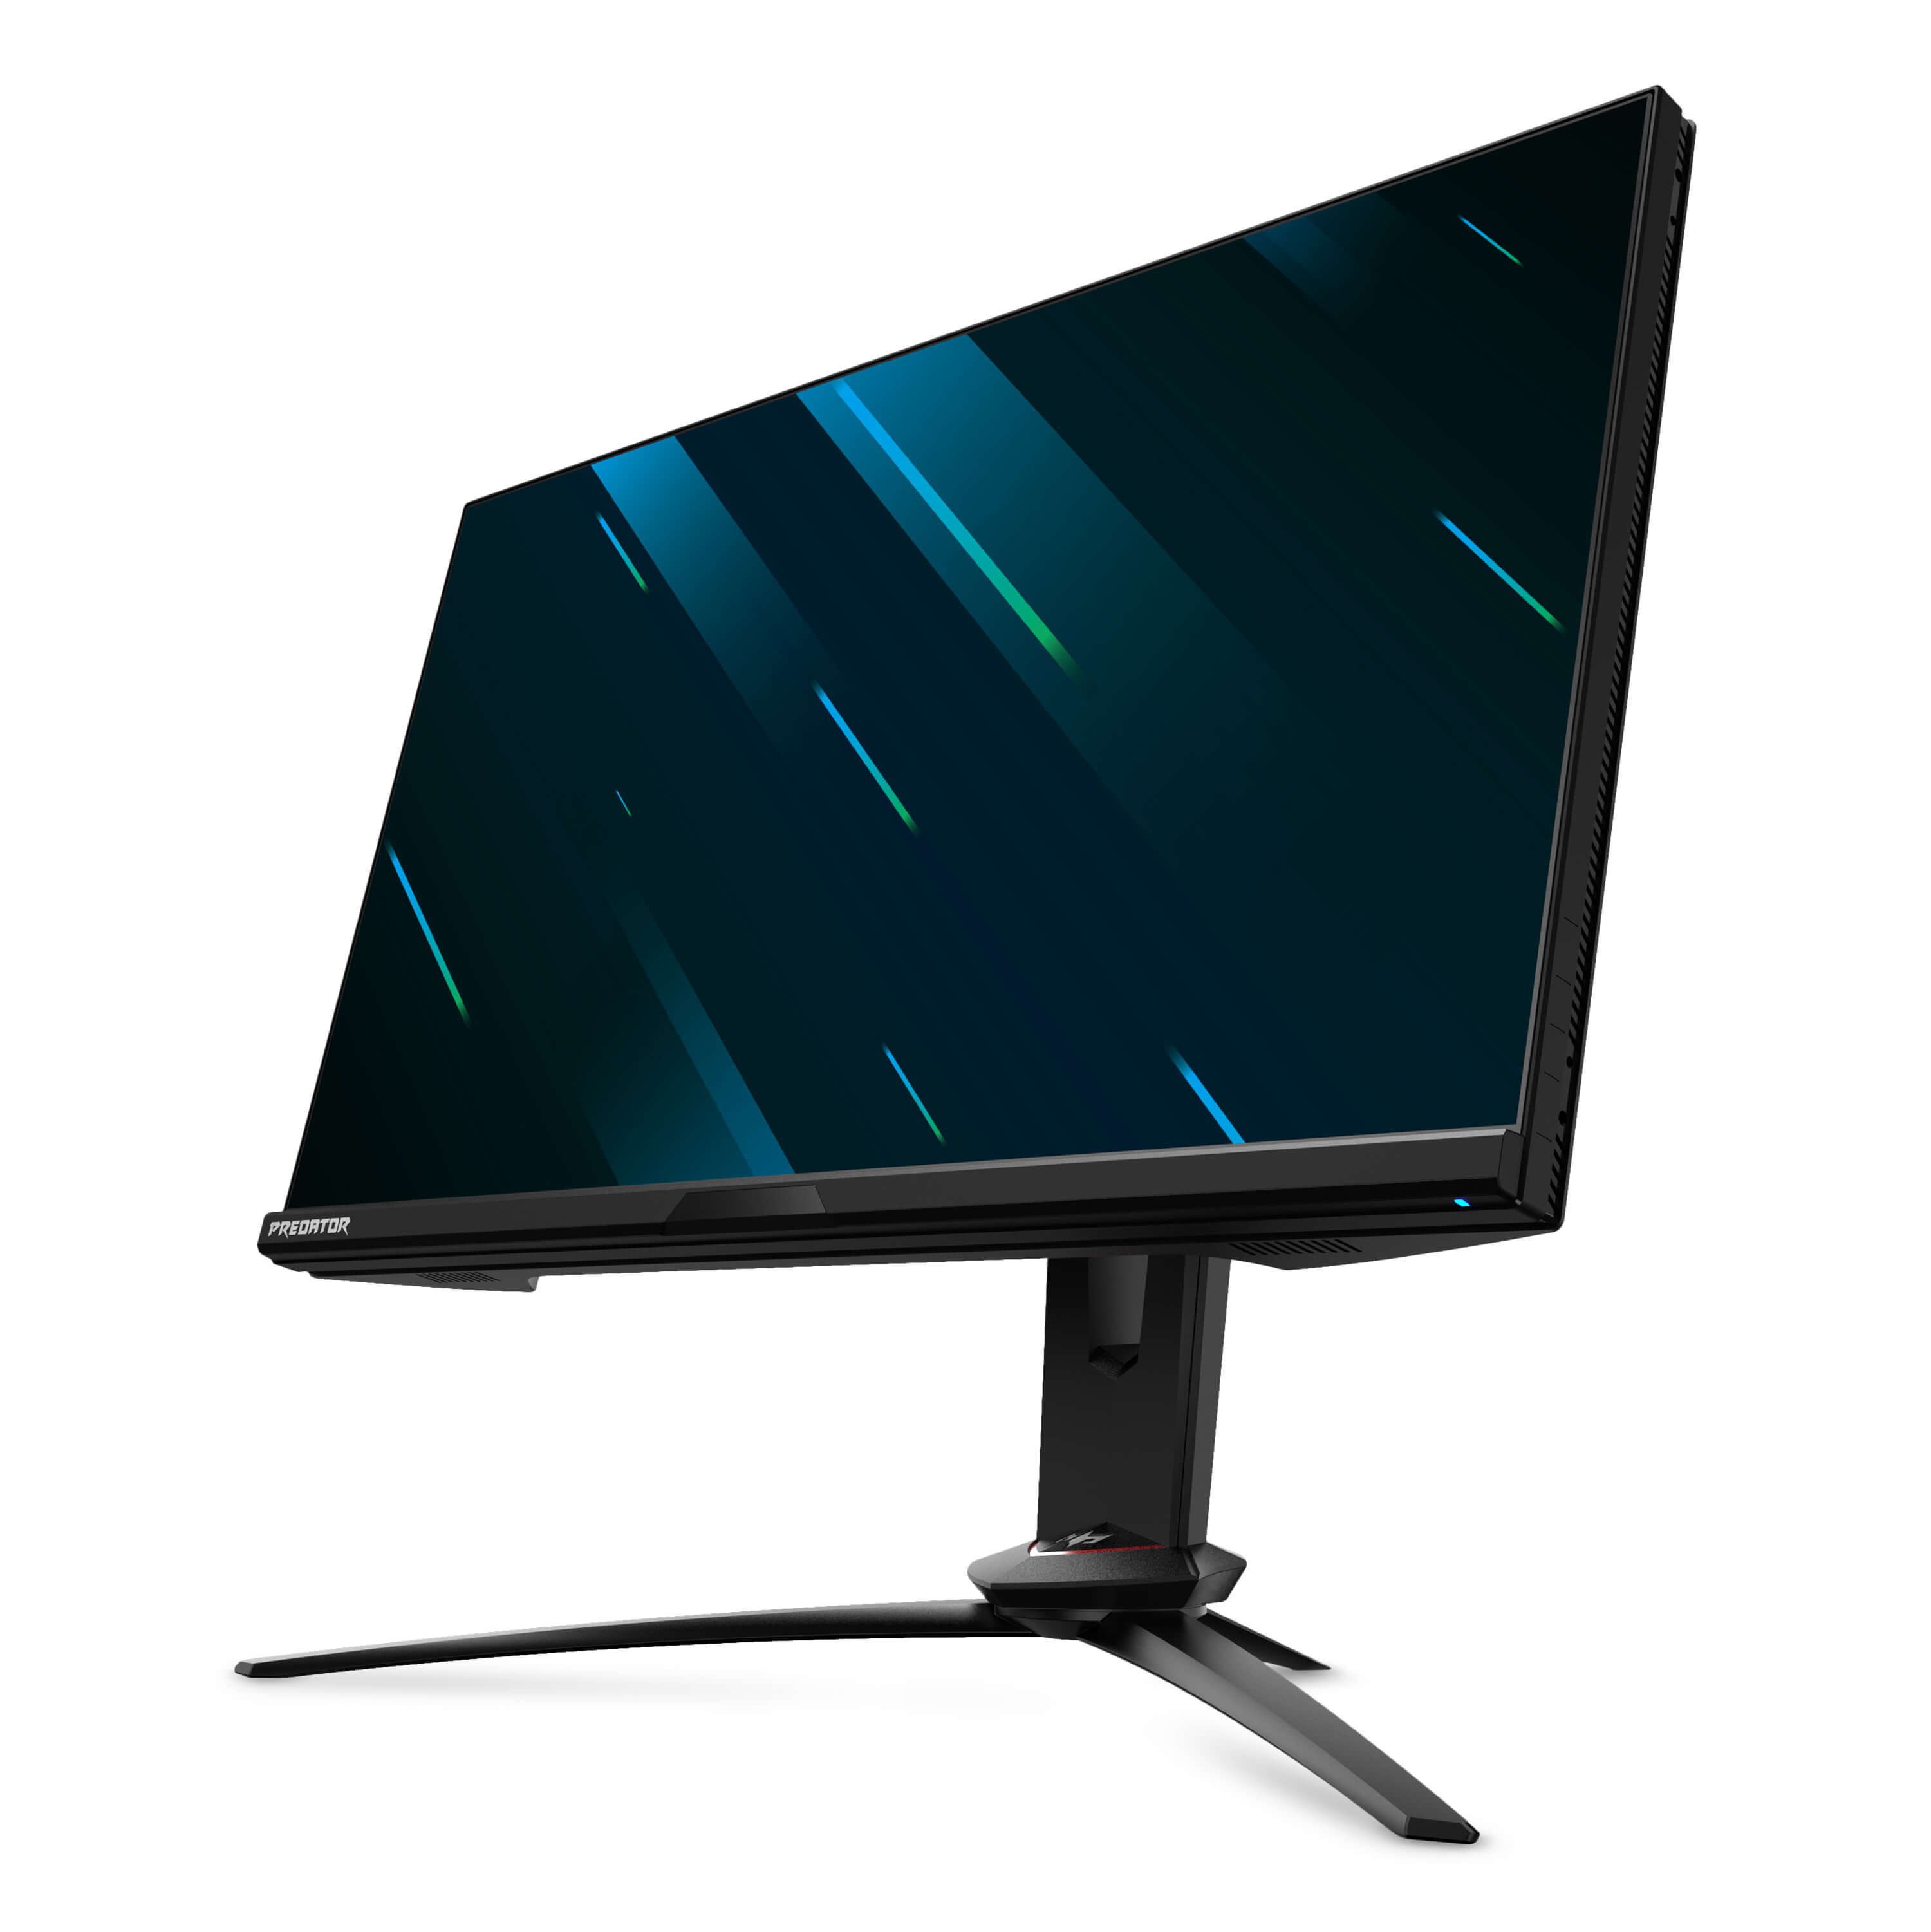 Acer's Predator X25 gaming monitor is the latest to feature 360 Hz refresh rate